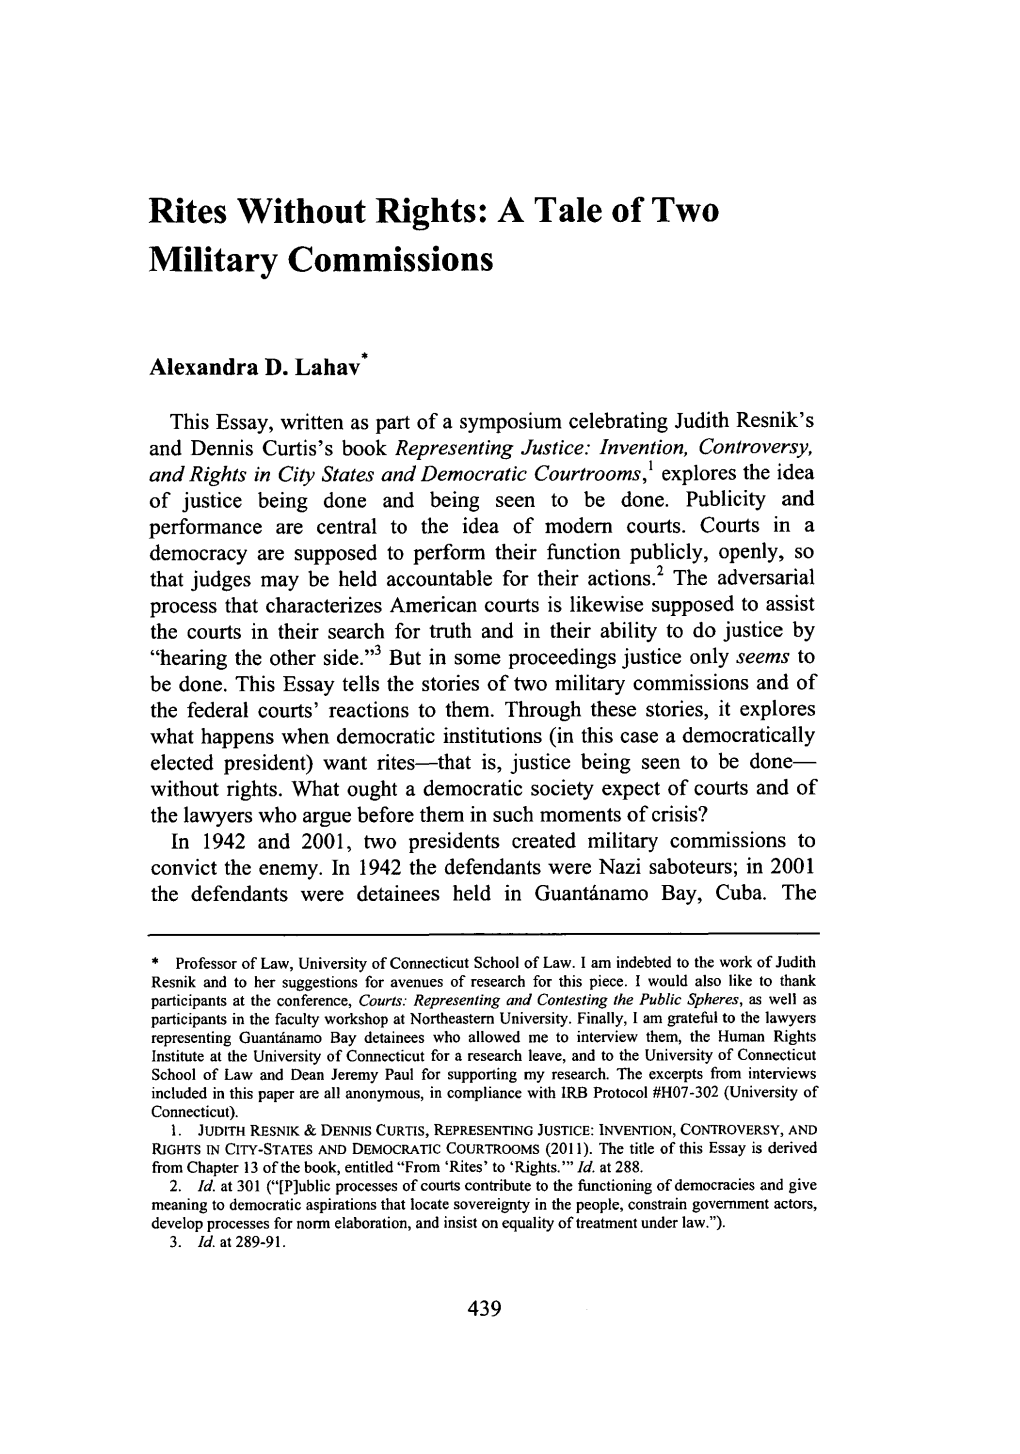 A Tale of Two Military Commissions